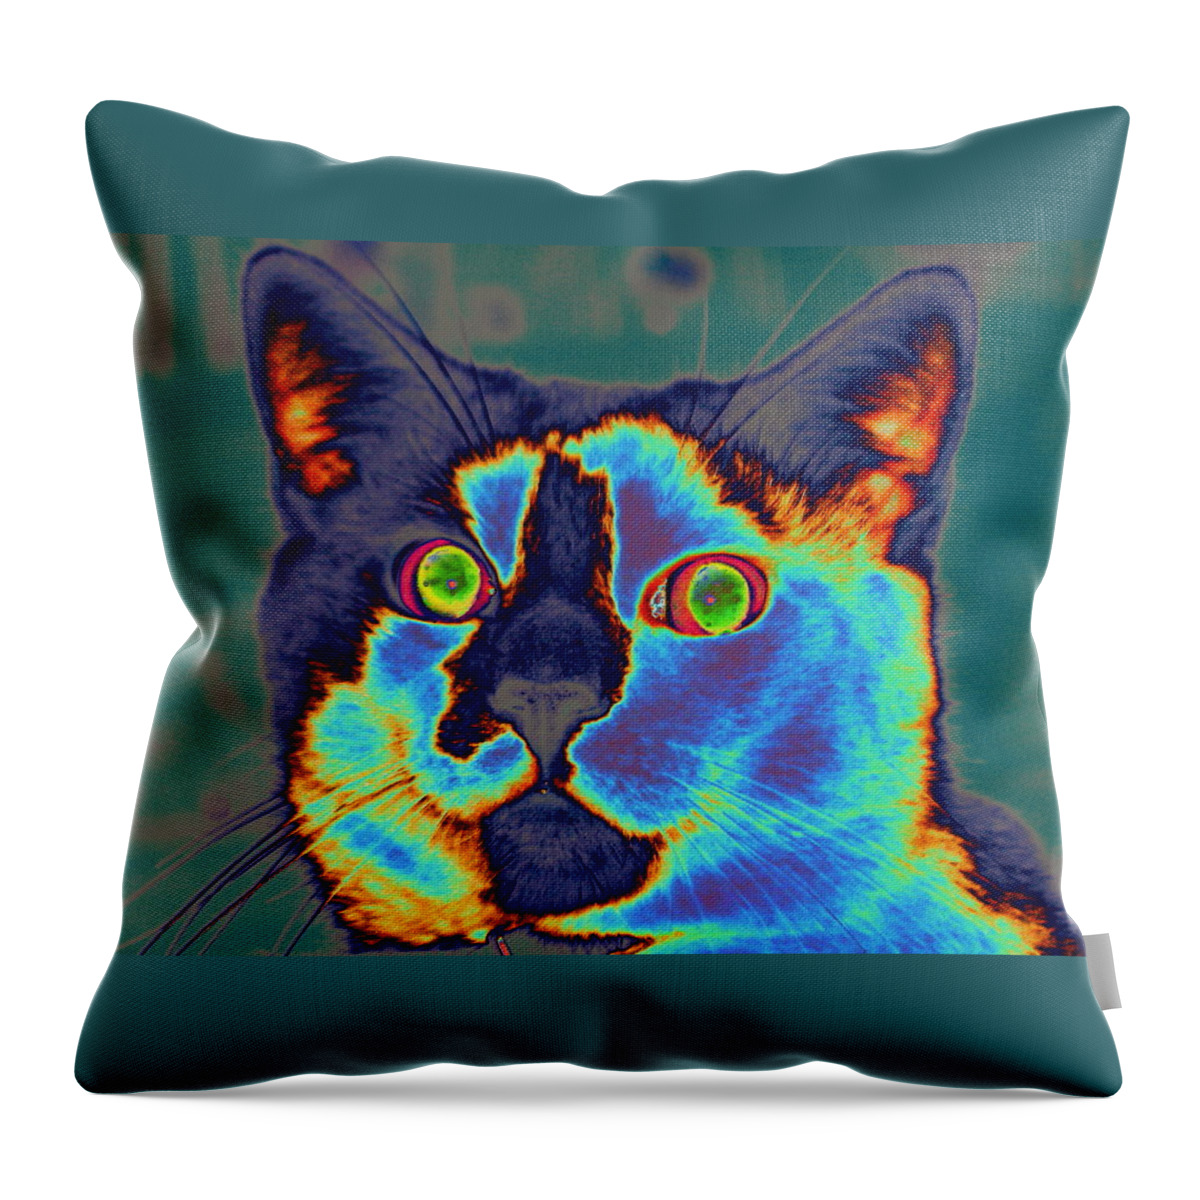 Kitty Throw Pillow featuring the digital art Blue Kitty by Larry Beat